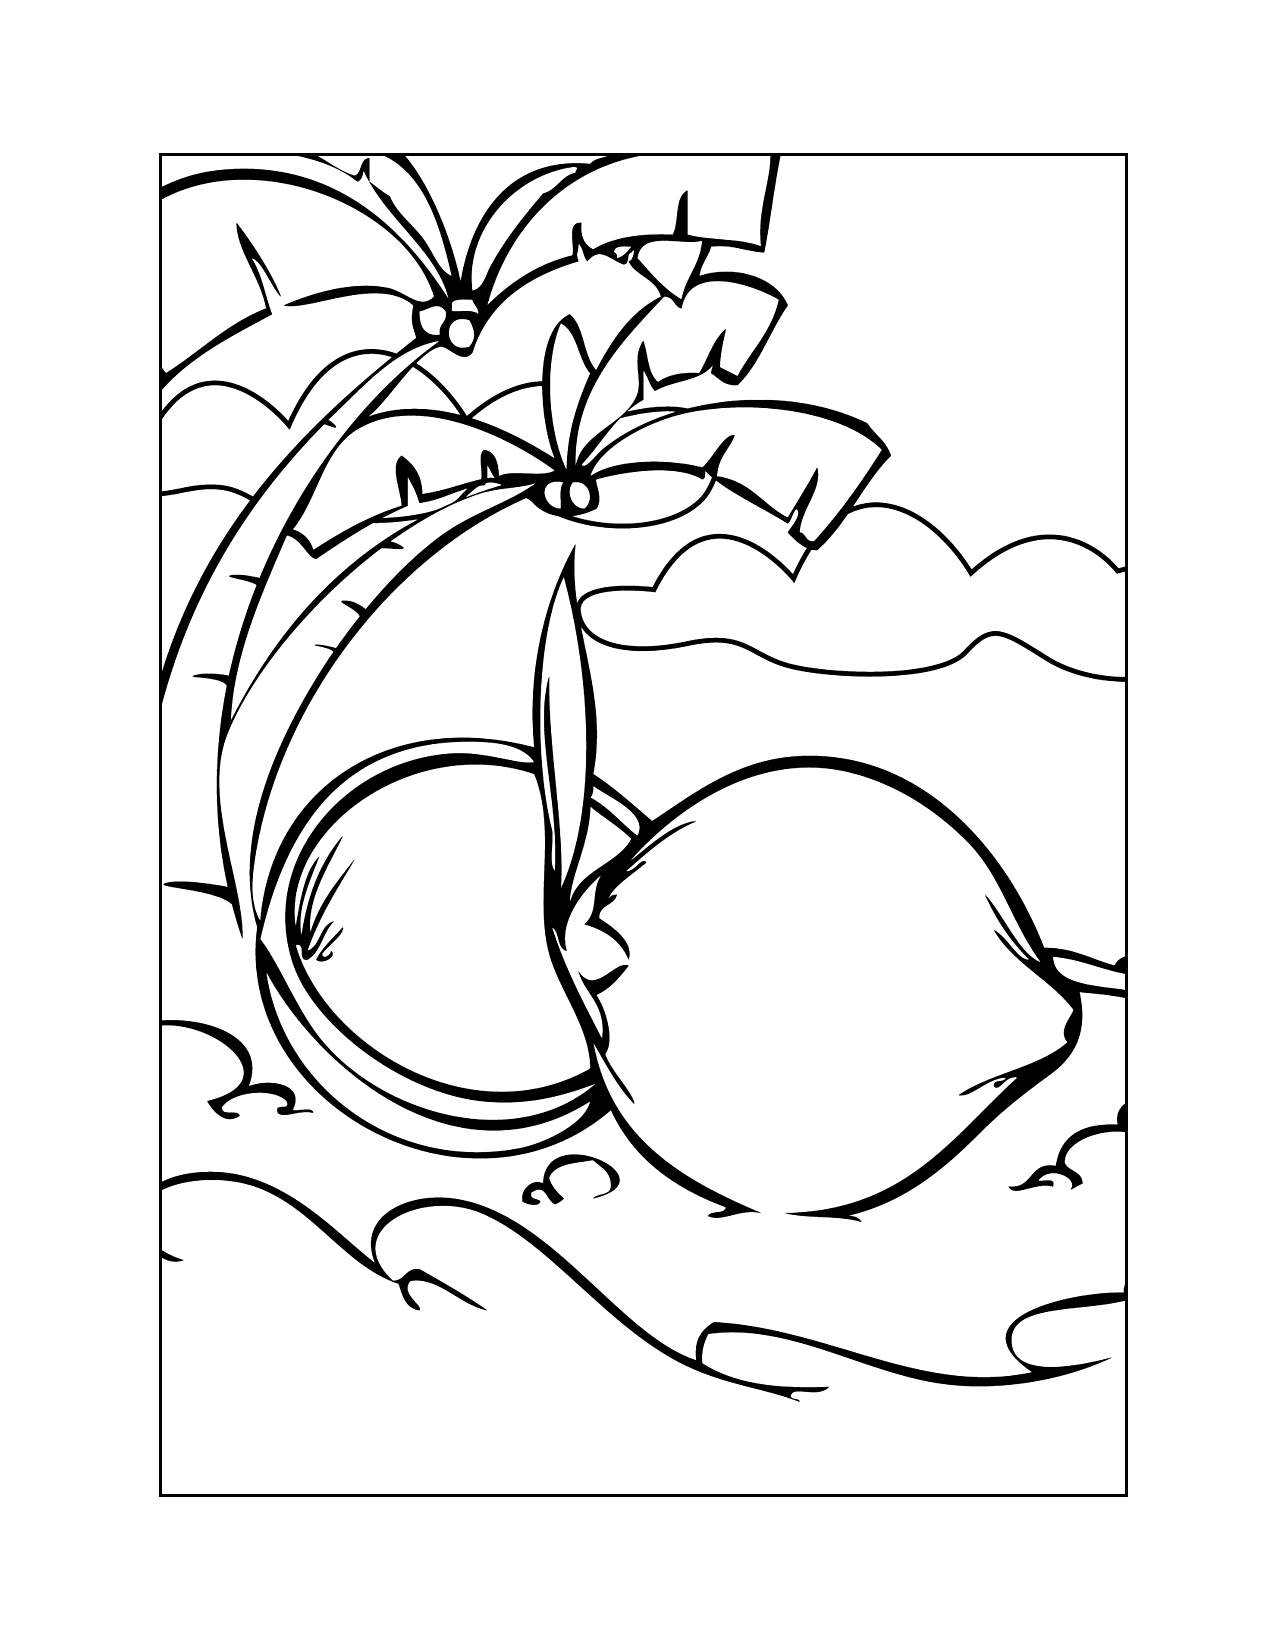 Coconuts On The Beach Coloring Page